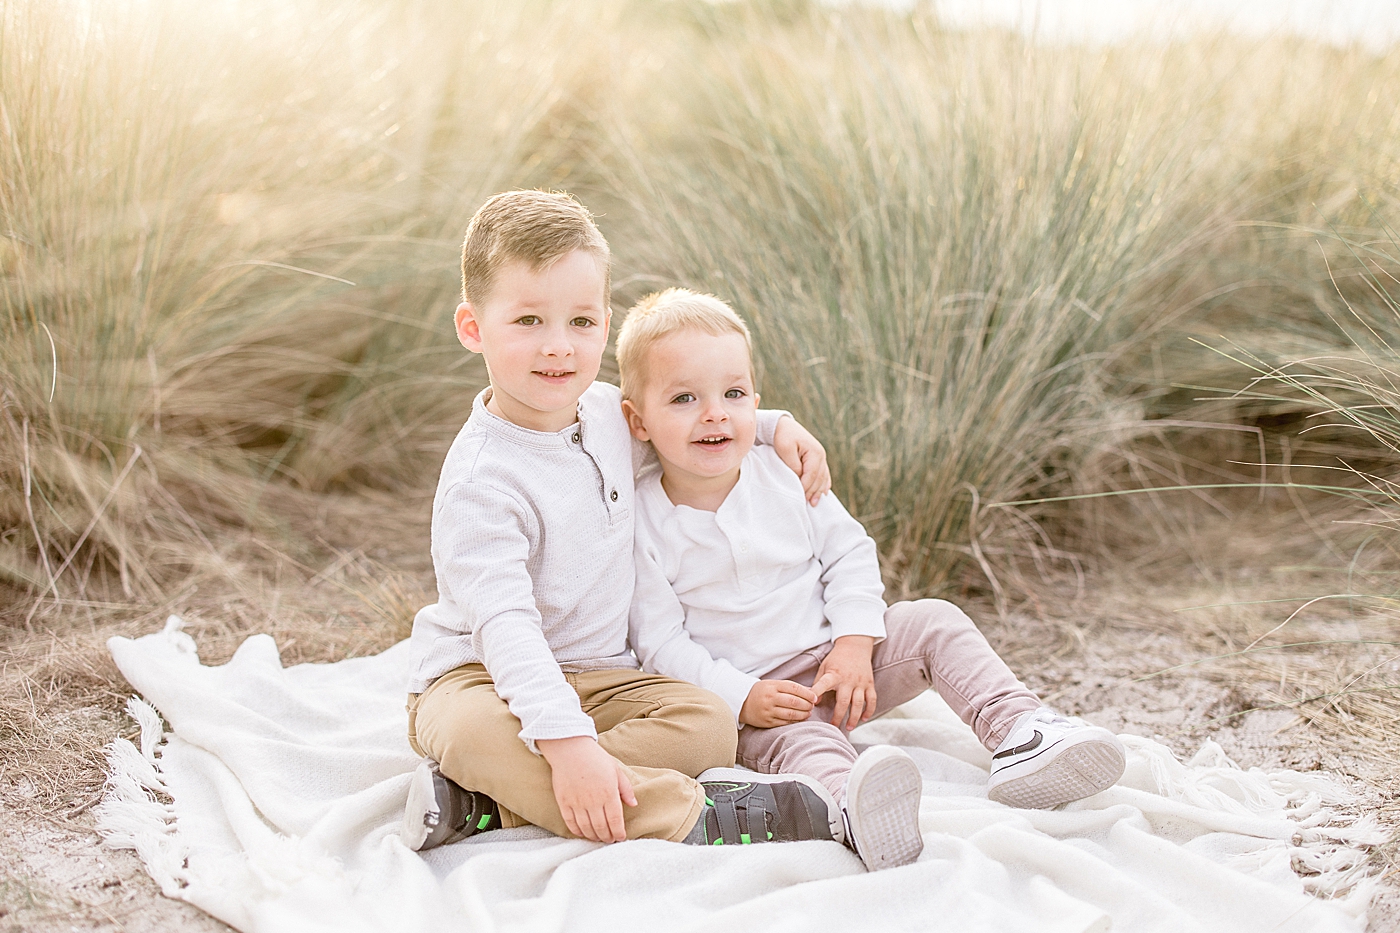 Two brothers sitting on a blanket with sunset behind them. Photo by Brittany Elise Photography.